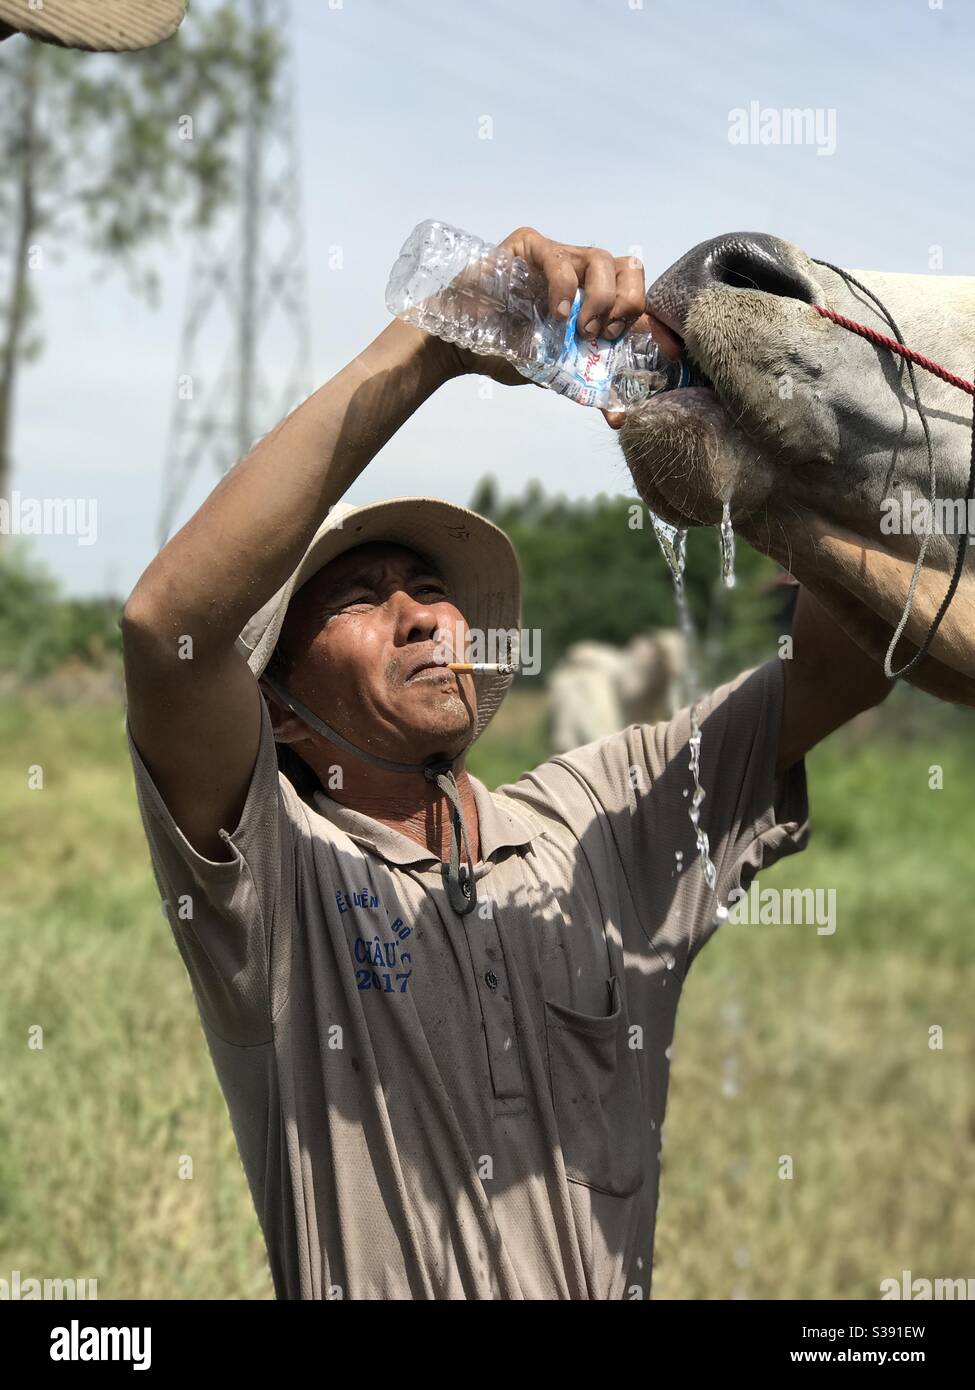 Give the cow water Stock Photo